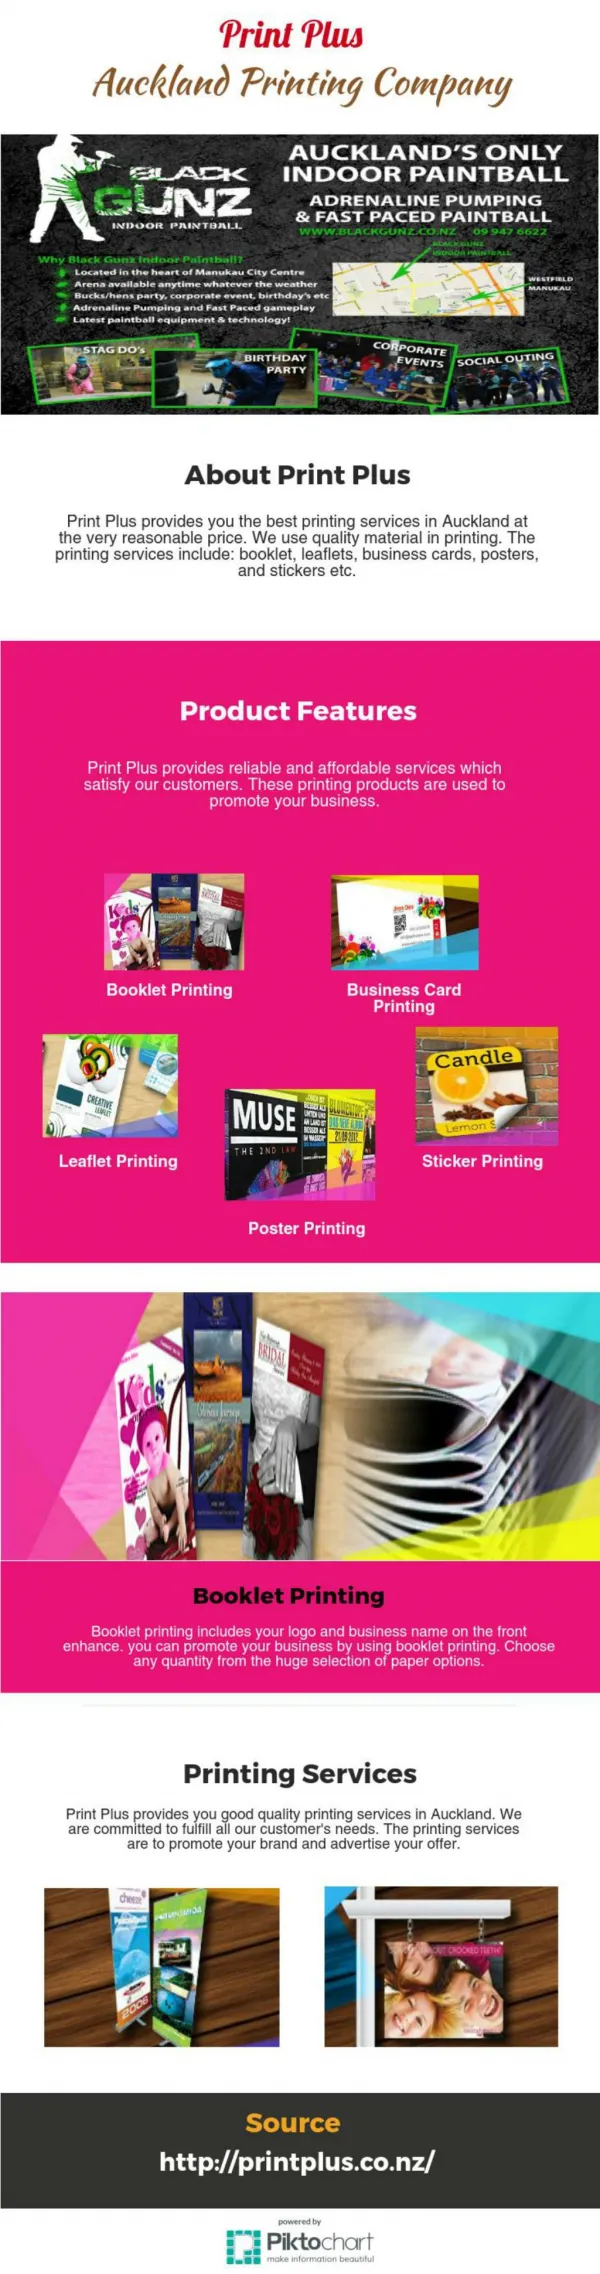 Booklet Printing From Print Plus